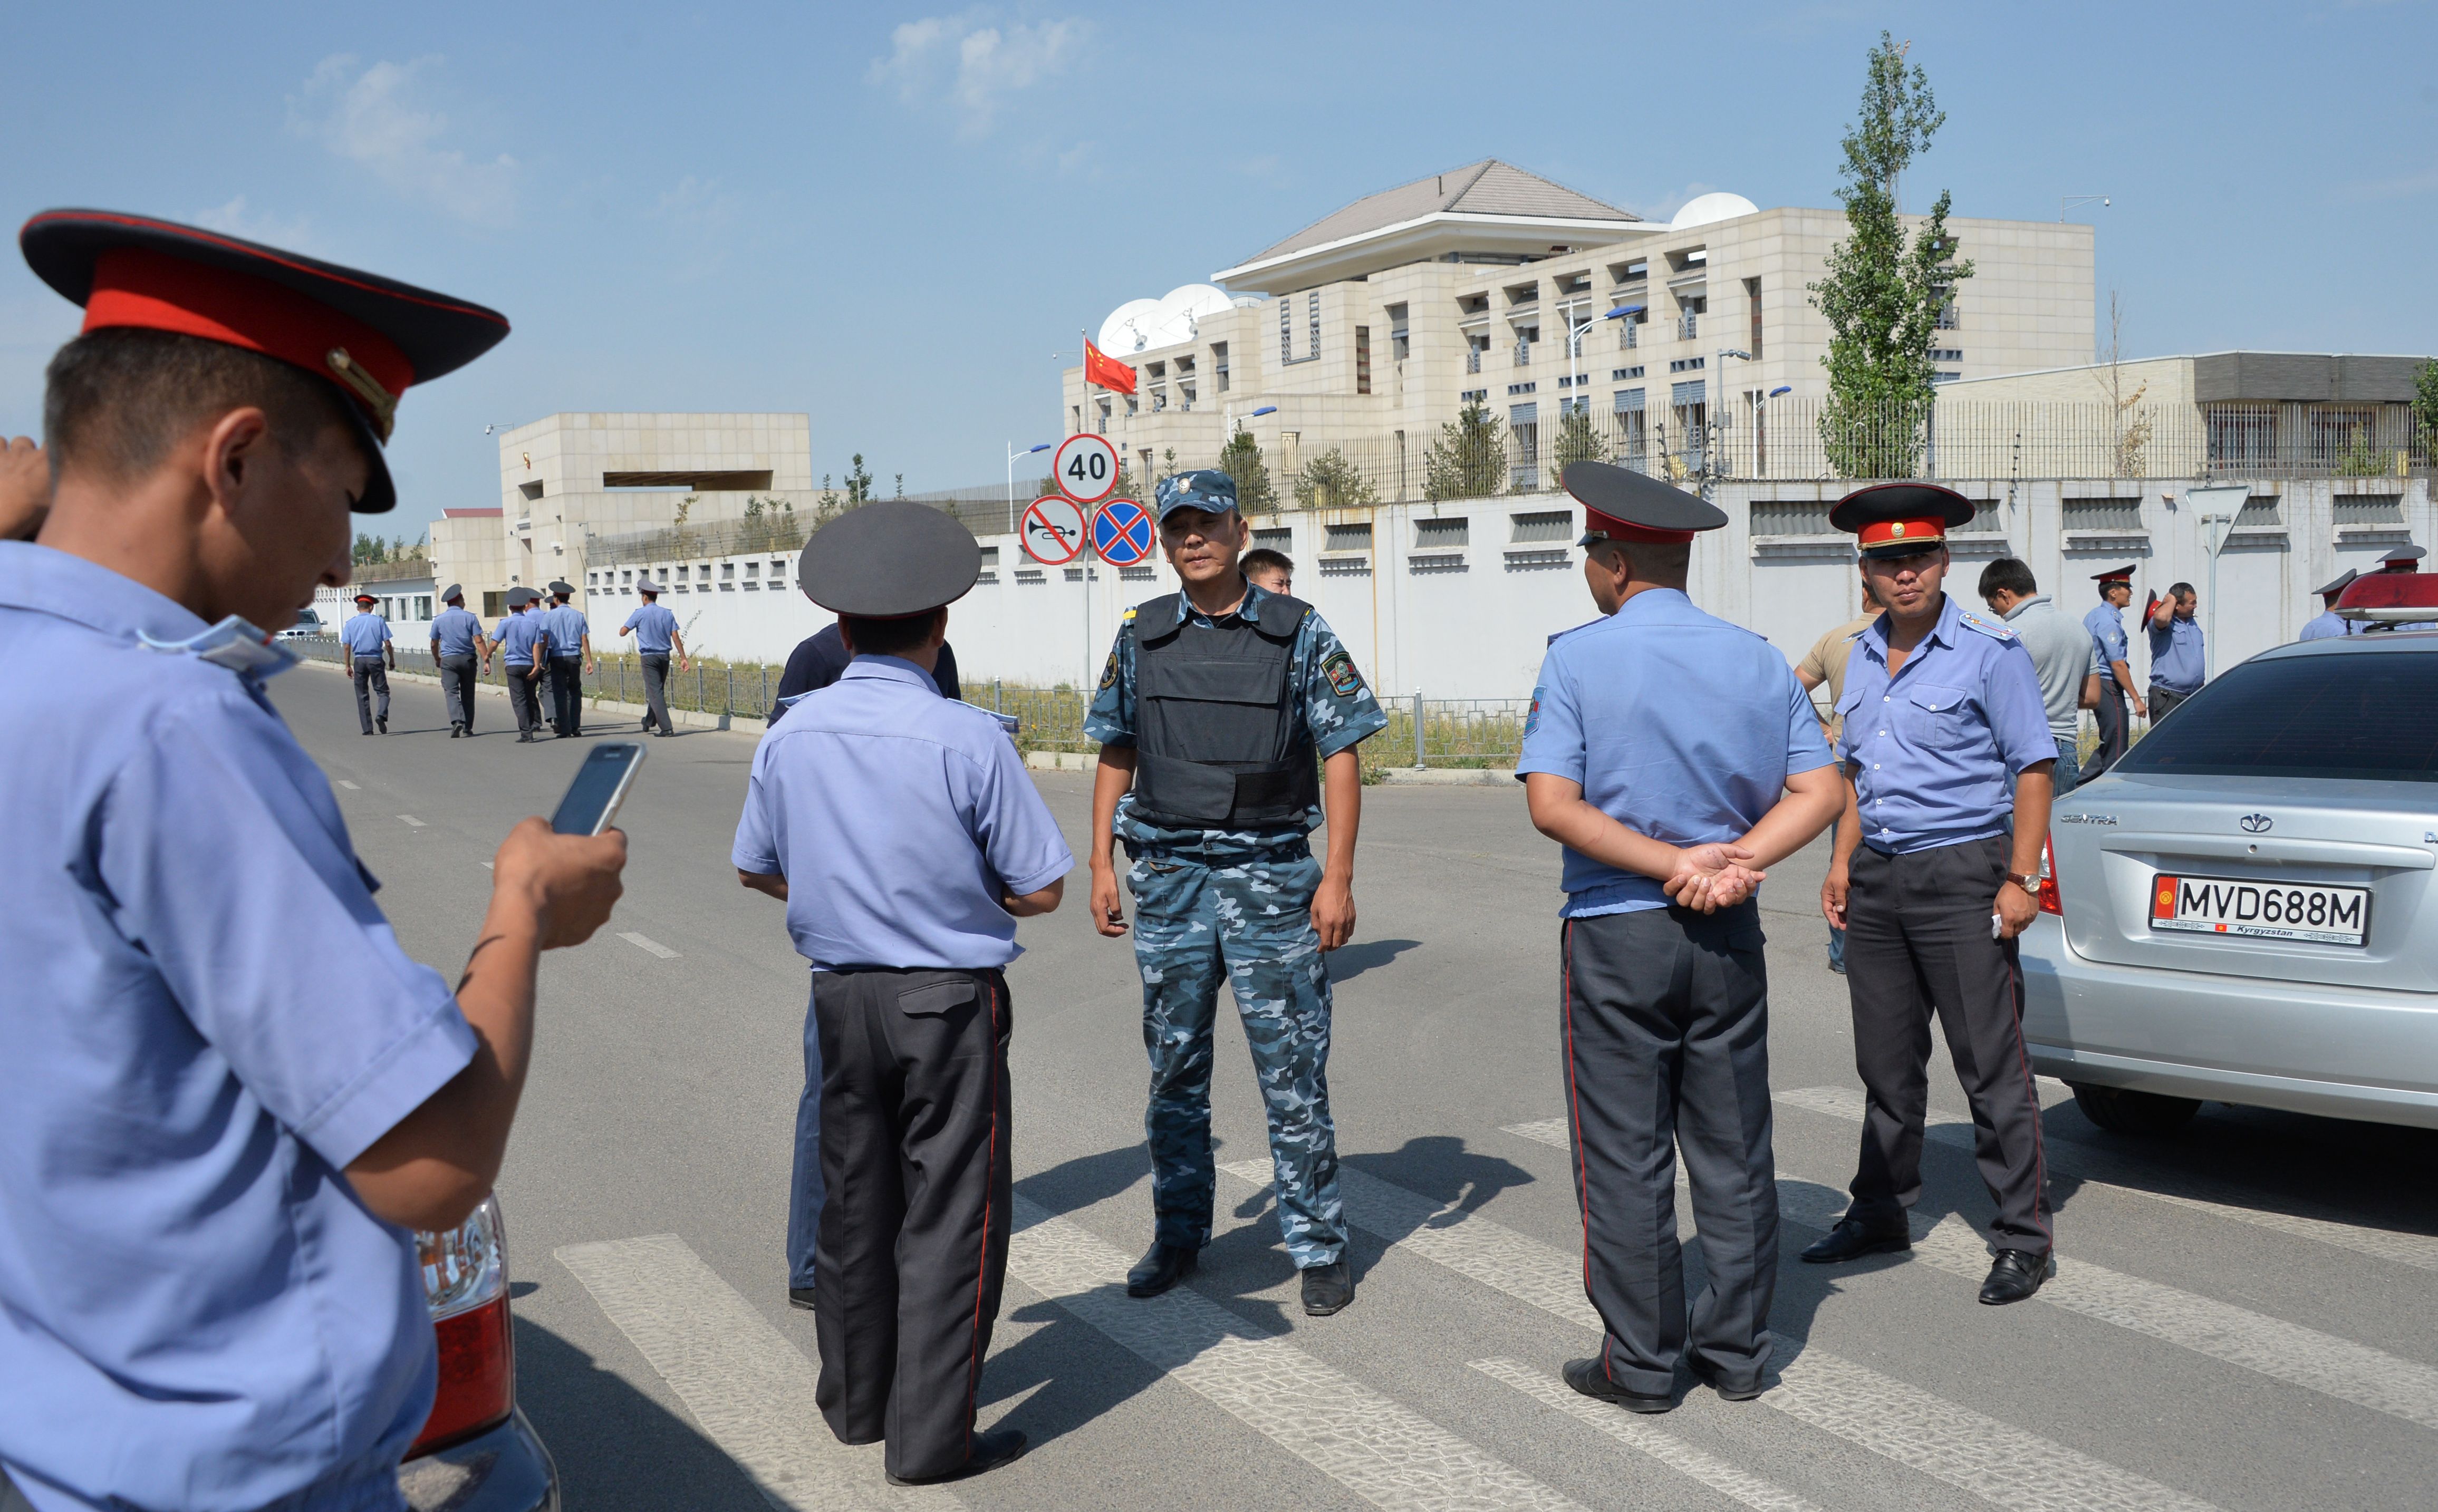 Kyrgyz police officers gather outside the Chinese embassy in Bishkek on August 30, 2016. (Vyacheslav Oseledko—AFP/Getty Images)